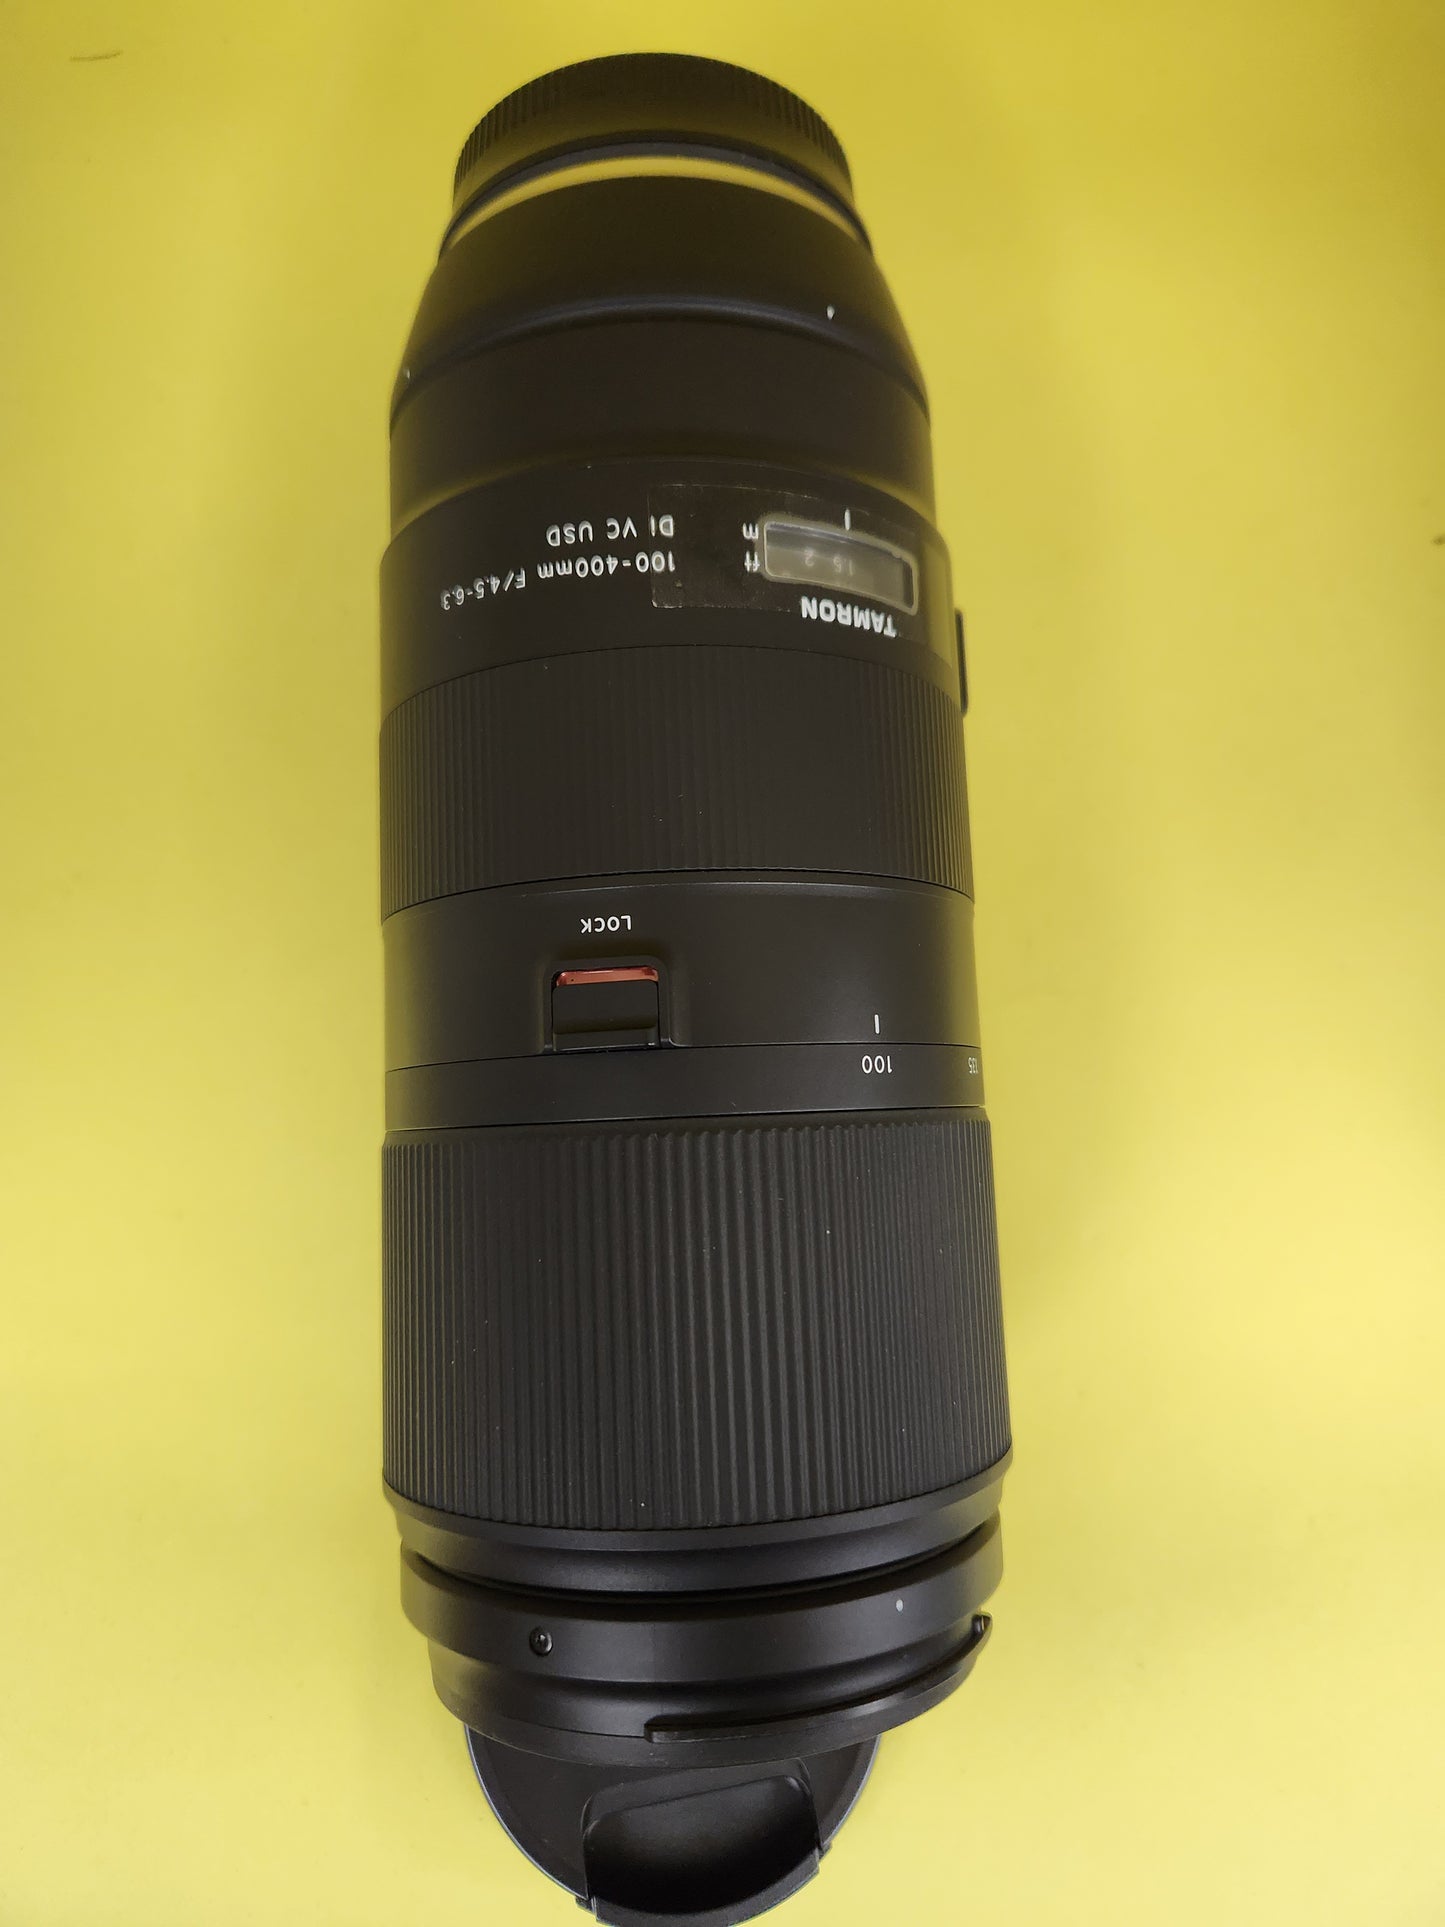 Tamron lens 100-400mm f4.5-6.3 used Di VC Canon EF Mount